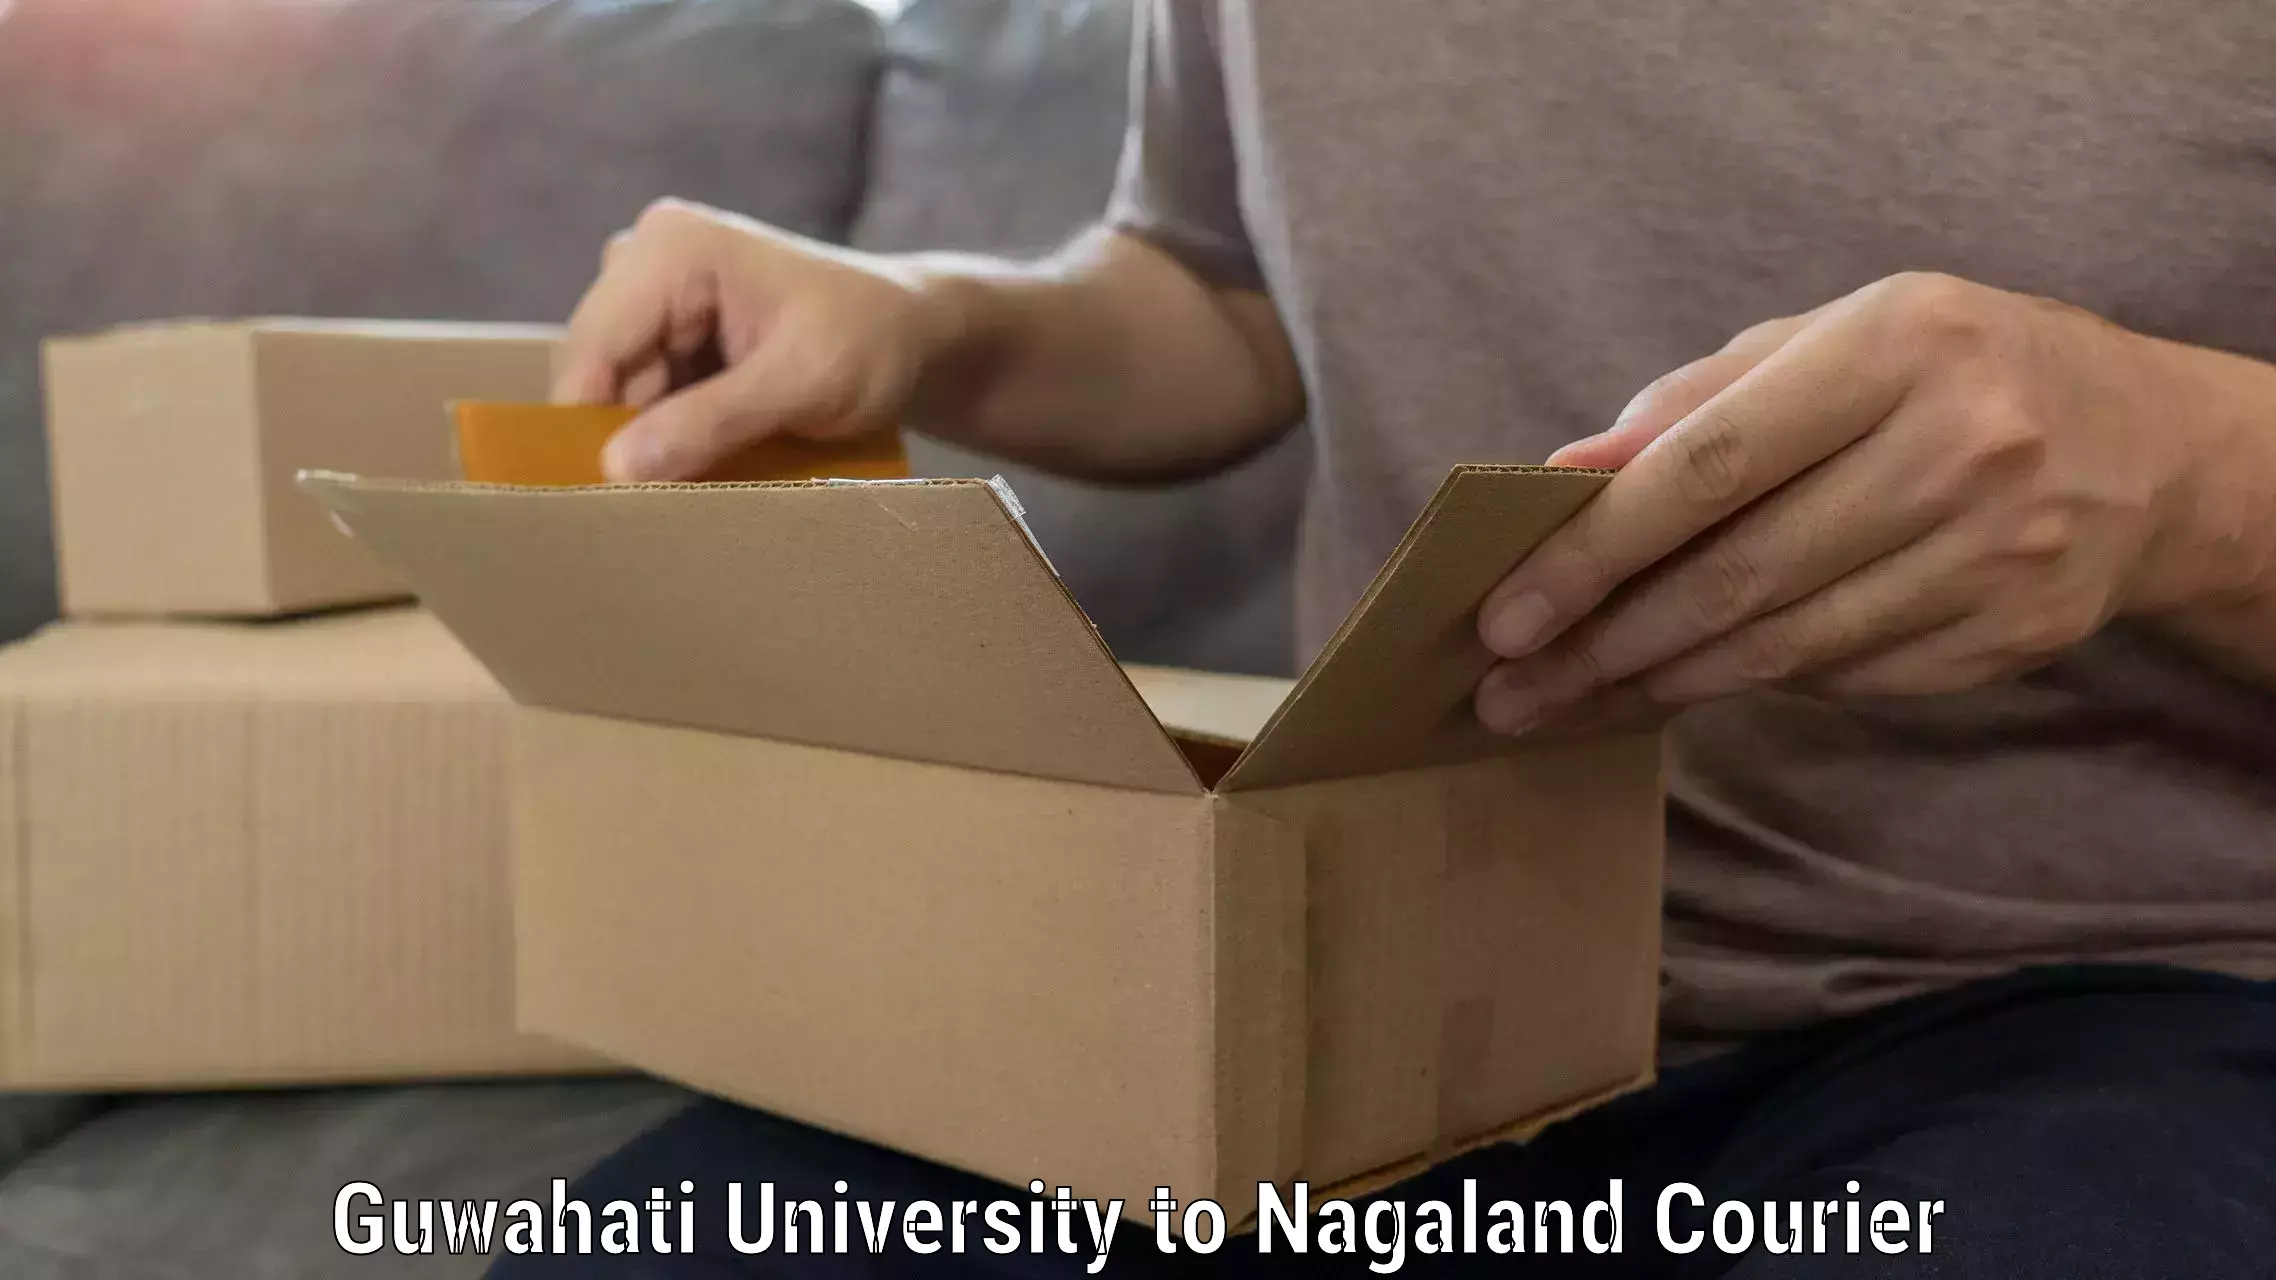 Furniture relocation services Guwahati University to NIT Nagaland